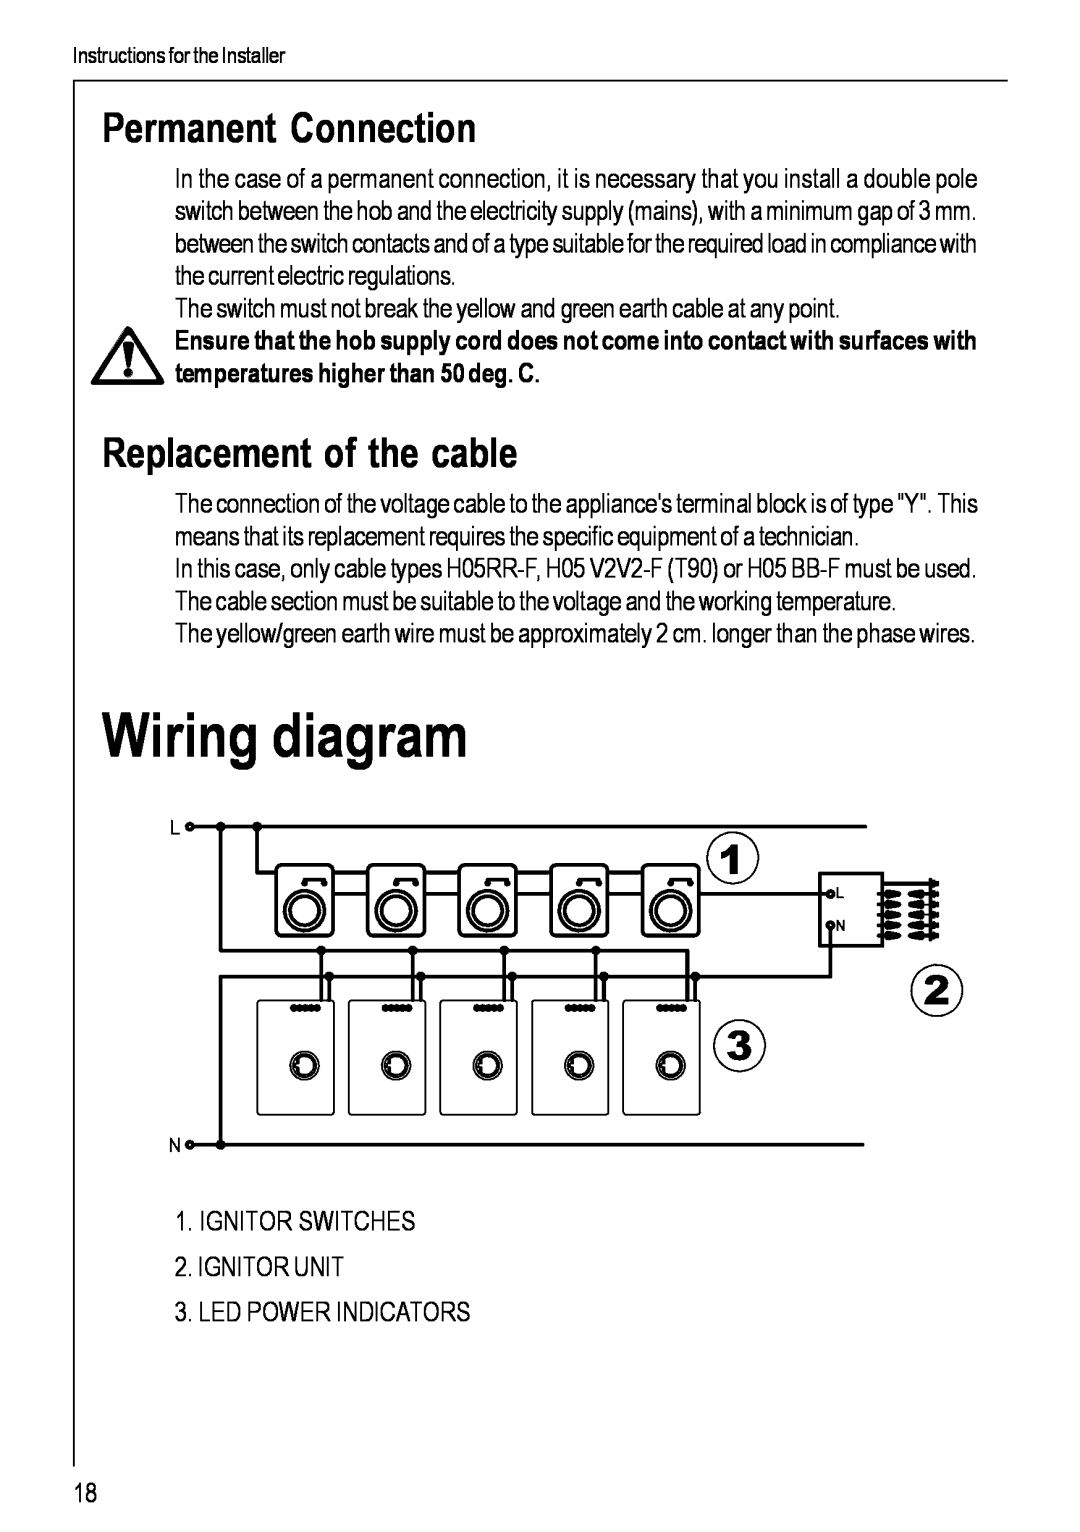 Electrolux 99852 G manual Wiring diagram, Permanent Connection, Replacement of the cable 